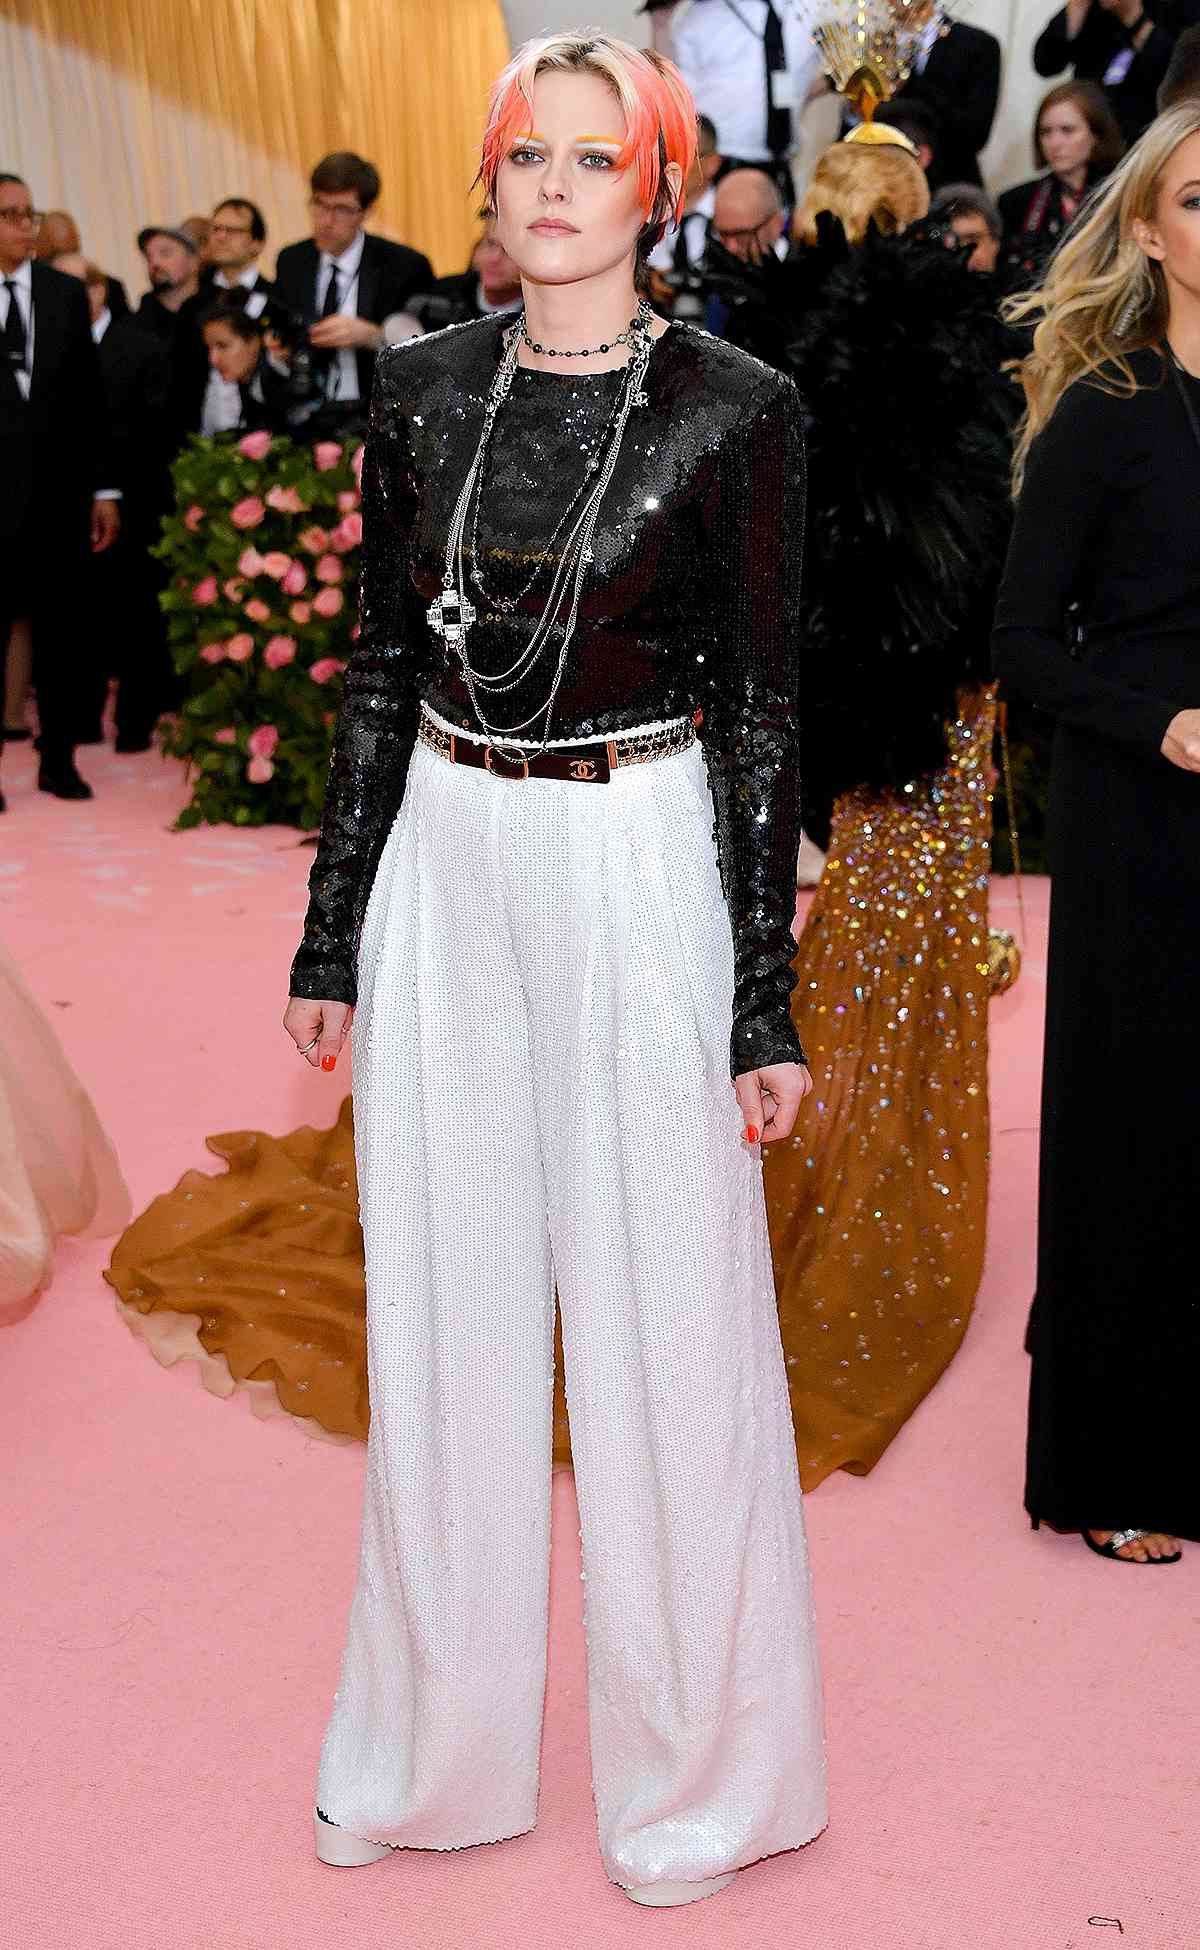 NEW YORK, NEW YORK - MAY 06: Kristen Stewart attends The 2019 Met Gala Celebrating Camp: Notes on Fashion at Metropolitan Museum of Art on May 06, 2019 in New York City. (Photo by Dia Dipasupil/FilmMagic)